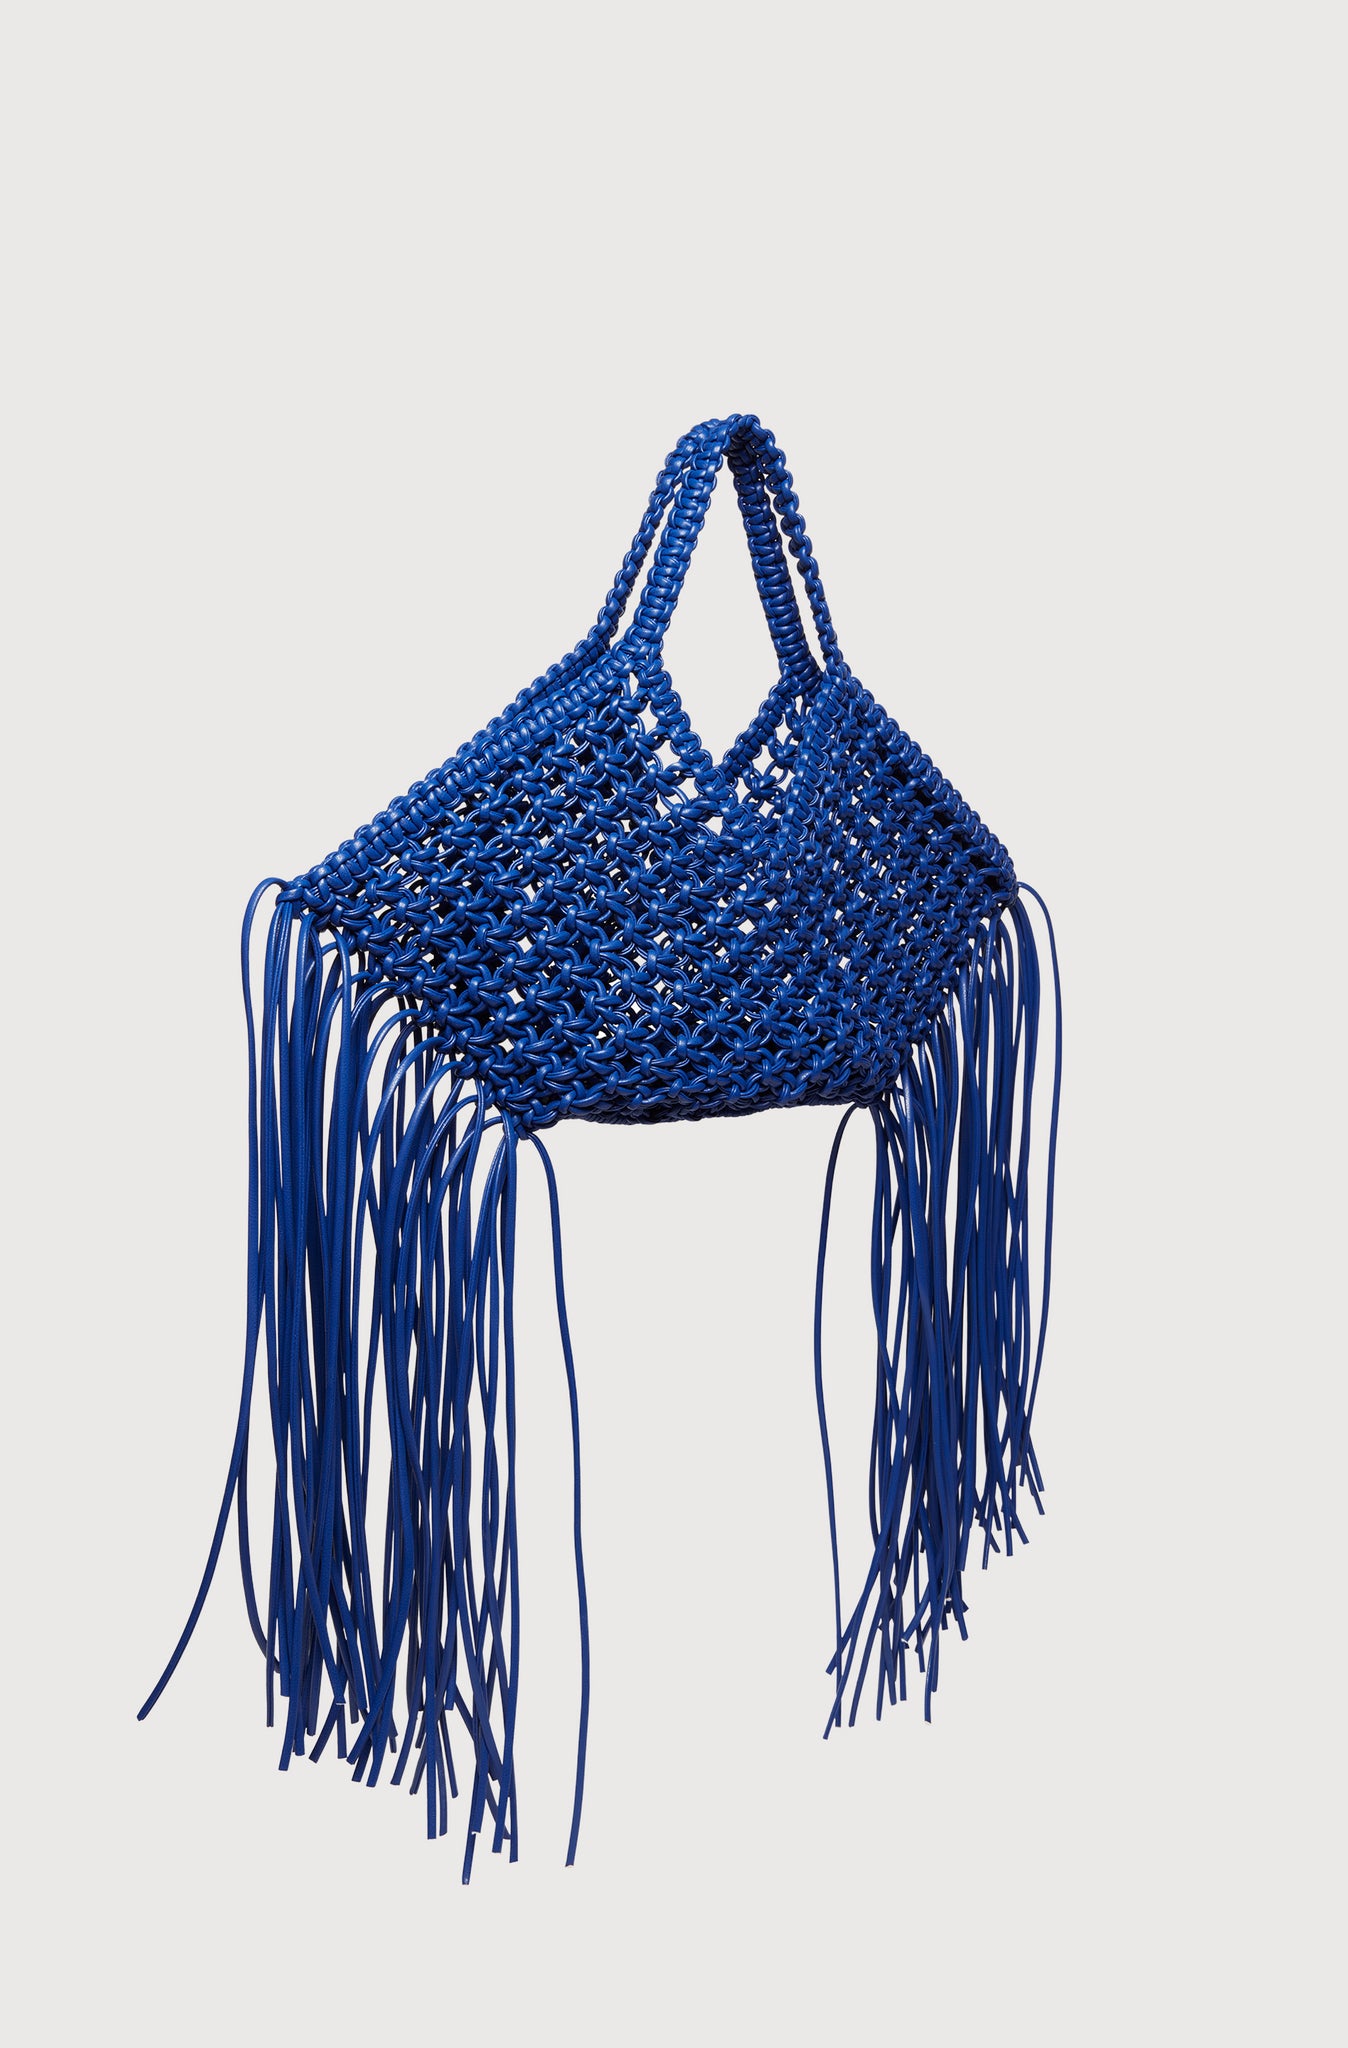 SMALL WOVEN BASKET - BLUE